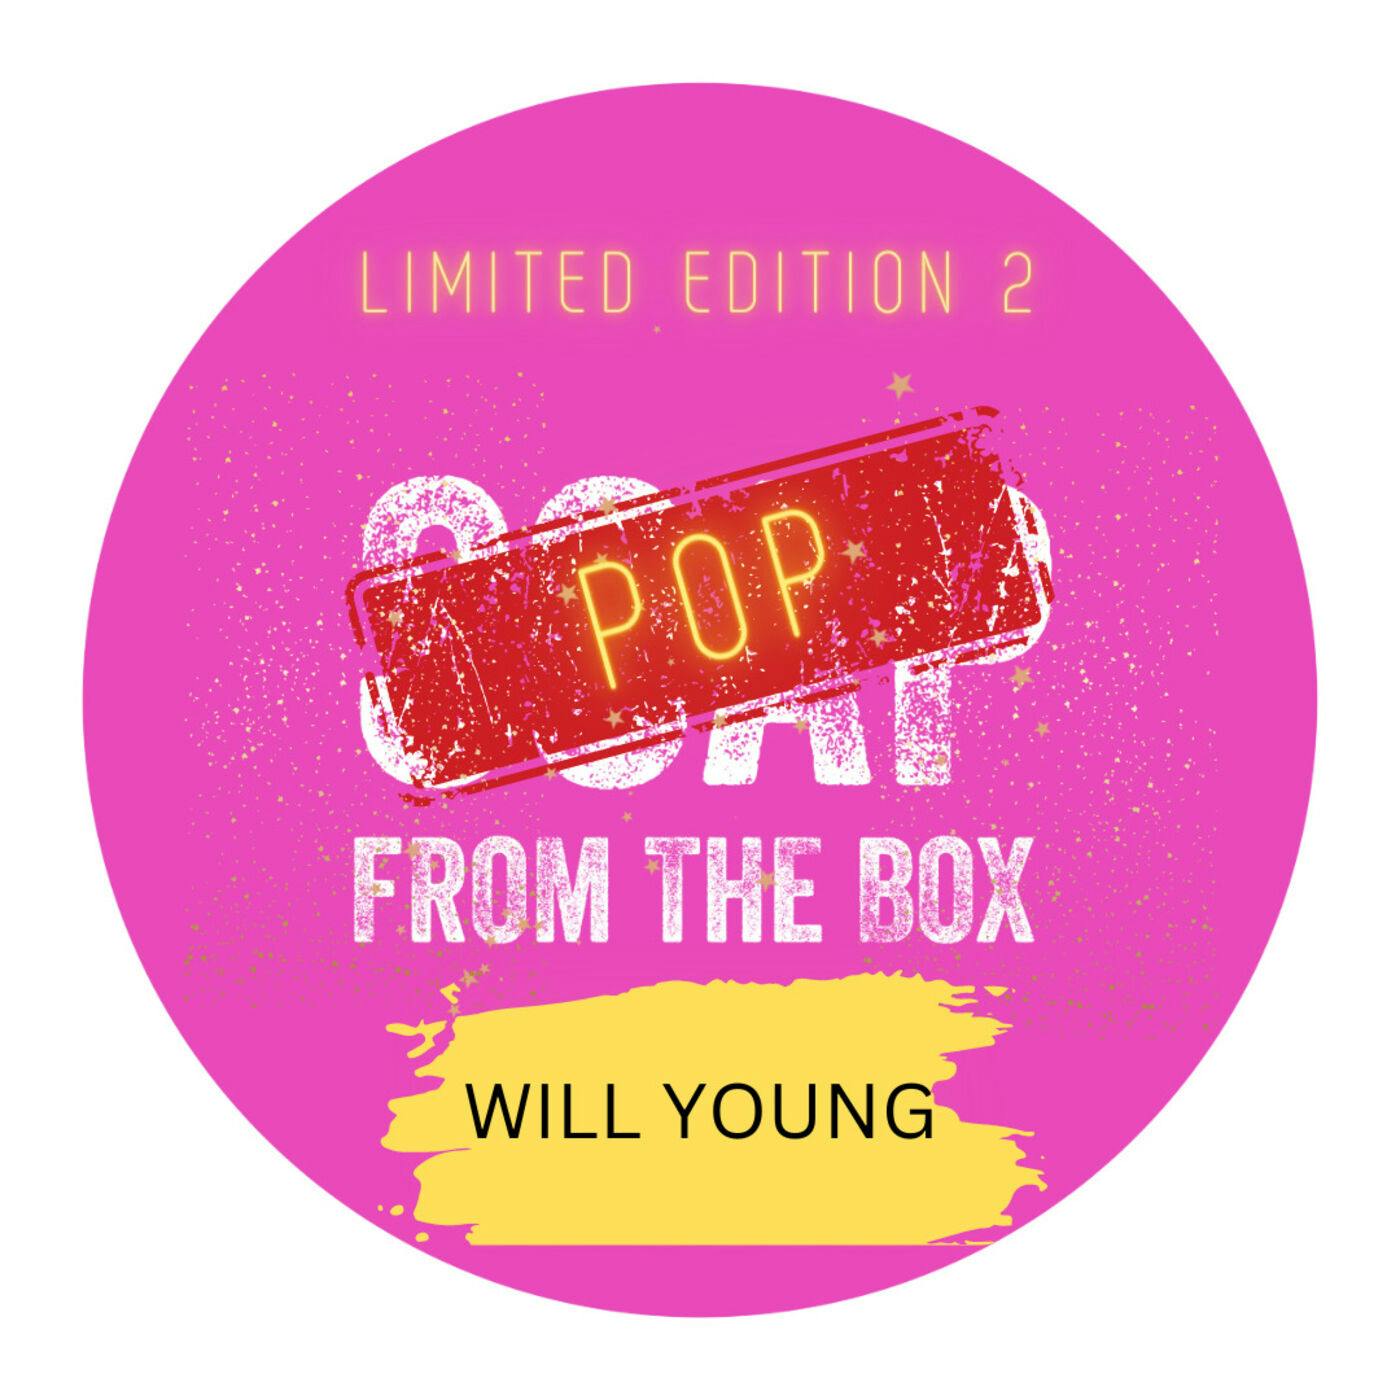 WILL YOUNG (Pop From The Box Ep 3)